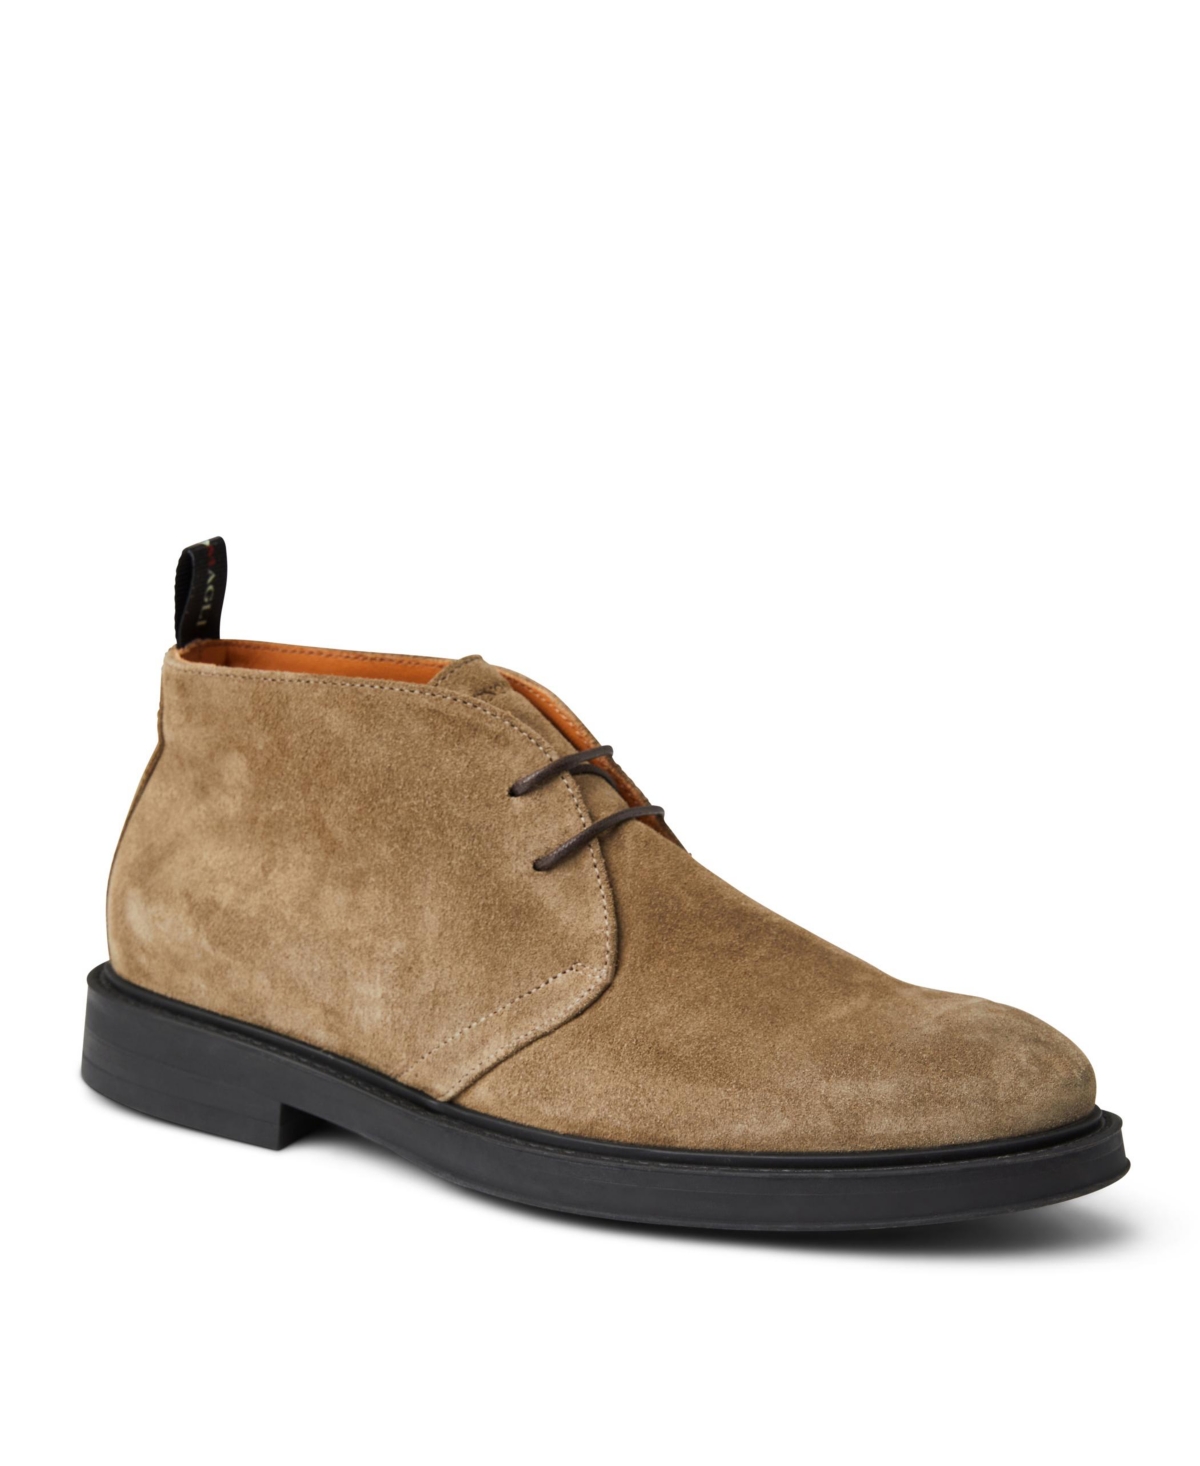 Men's Taddeo Chukka Boots - Taupe Suede